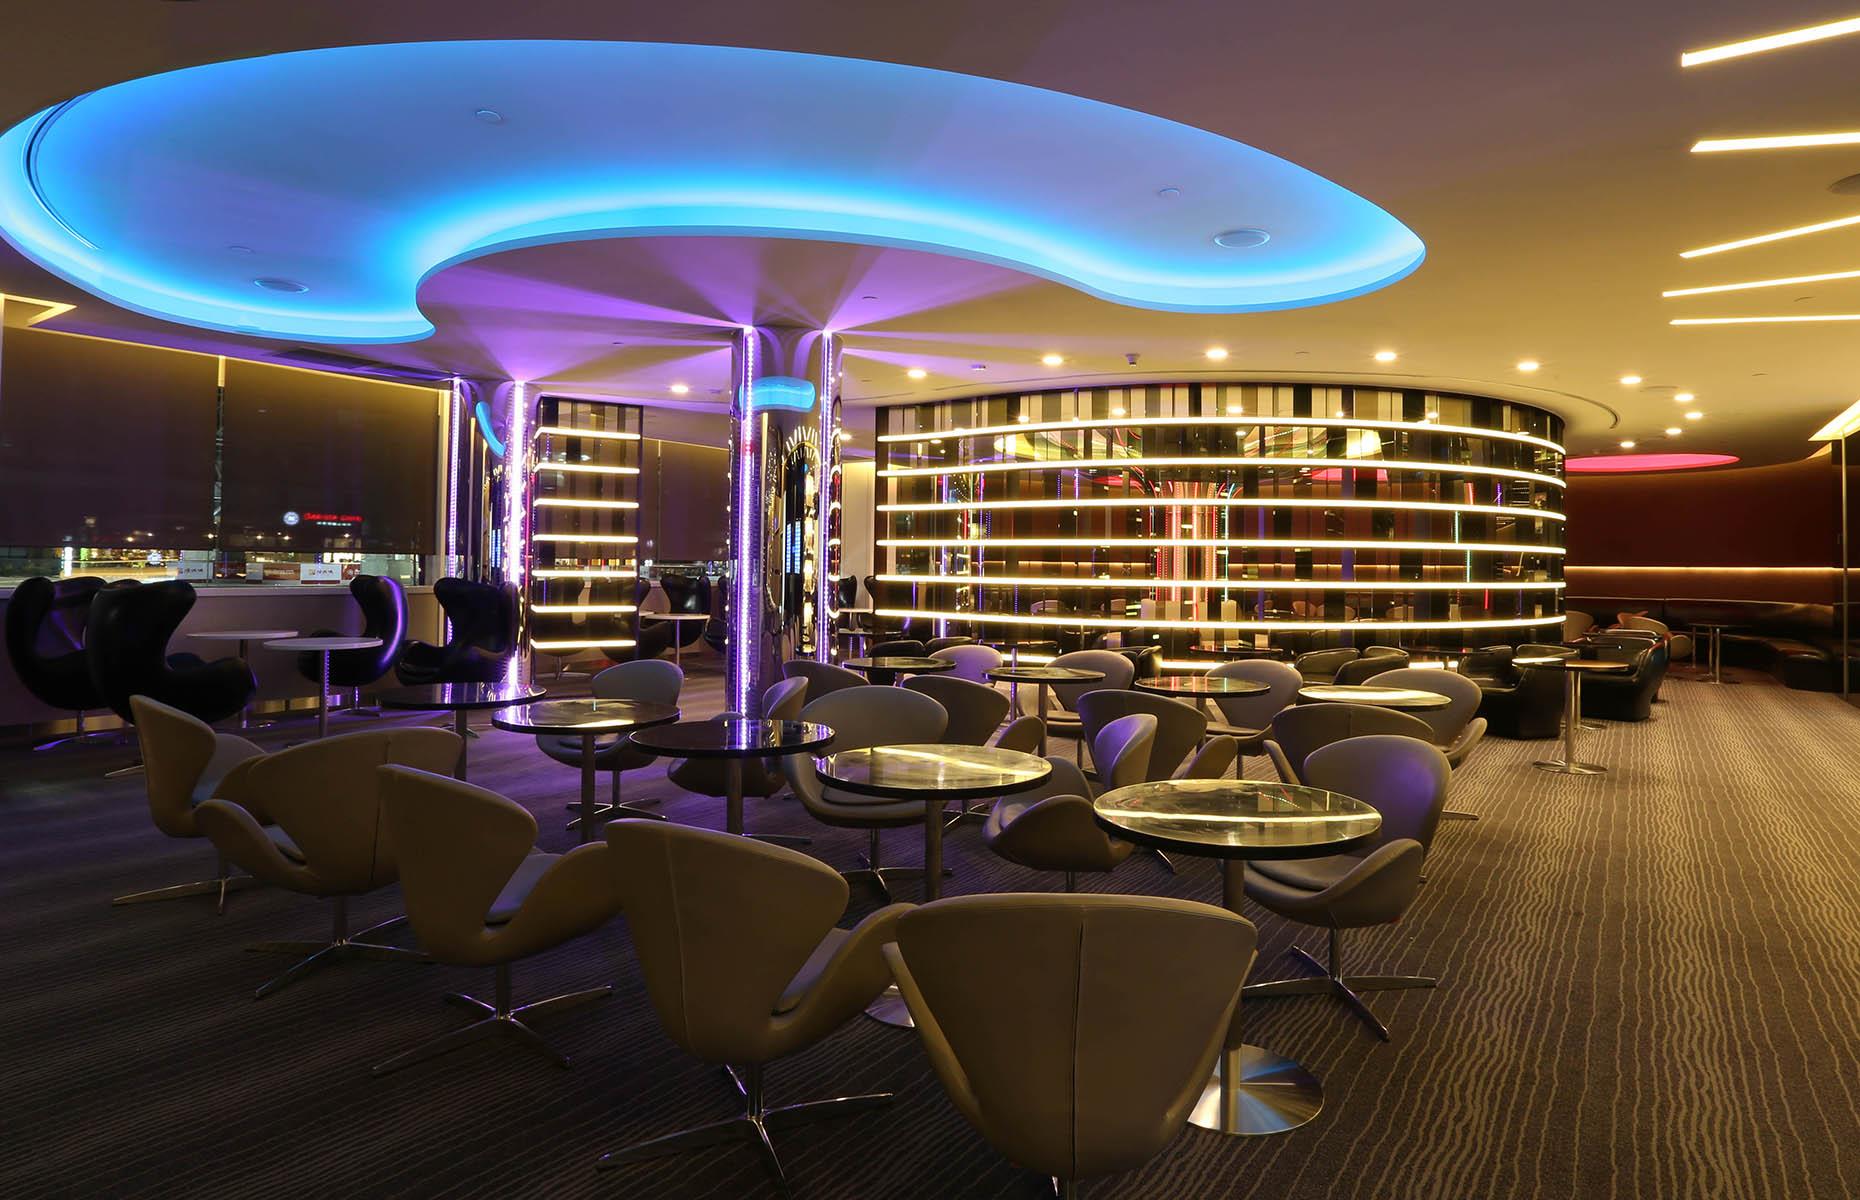 <p>The main lighting installation even changes color to add to the futuristic experience in this intriguing lounge, which overall is a welcome departure from many of the basic interiors of classic airport lounges.</p>  <p><strong><a href="https://www.loveexploring.com/galleries/99546/from-hel-to-cia-hilarious-real-airport-codes">From HEL to CIA – check out these hilarious real airport codes</a></strong></p>